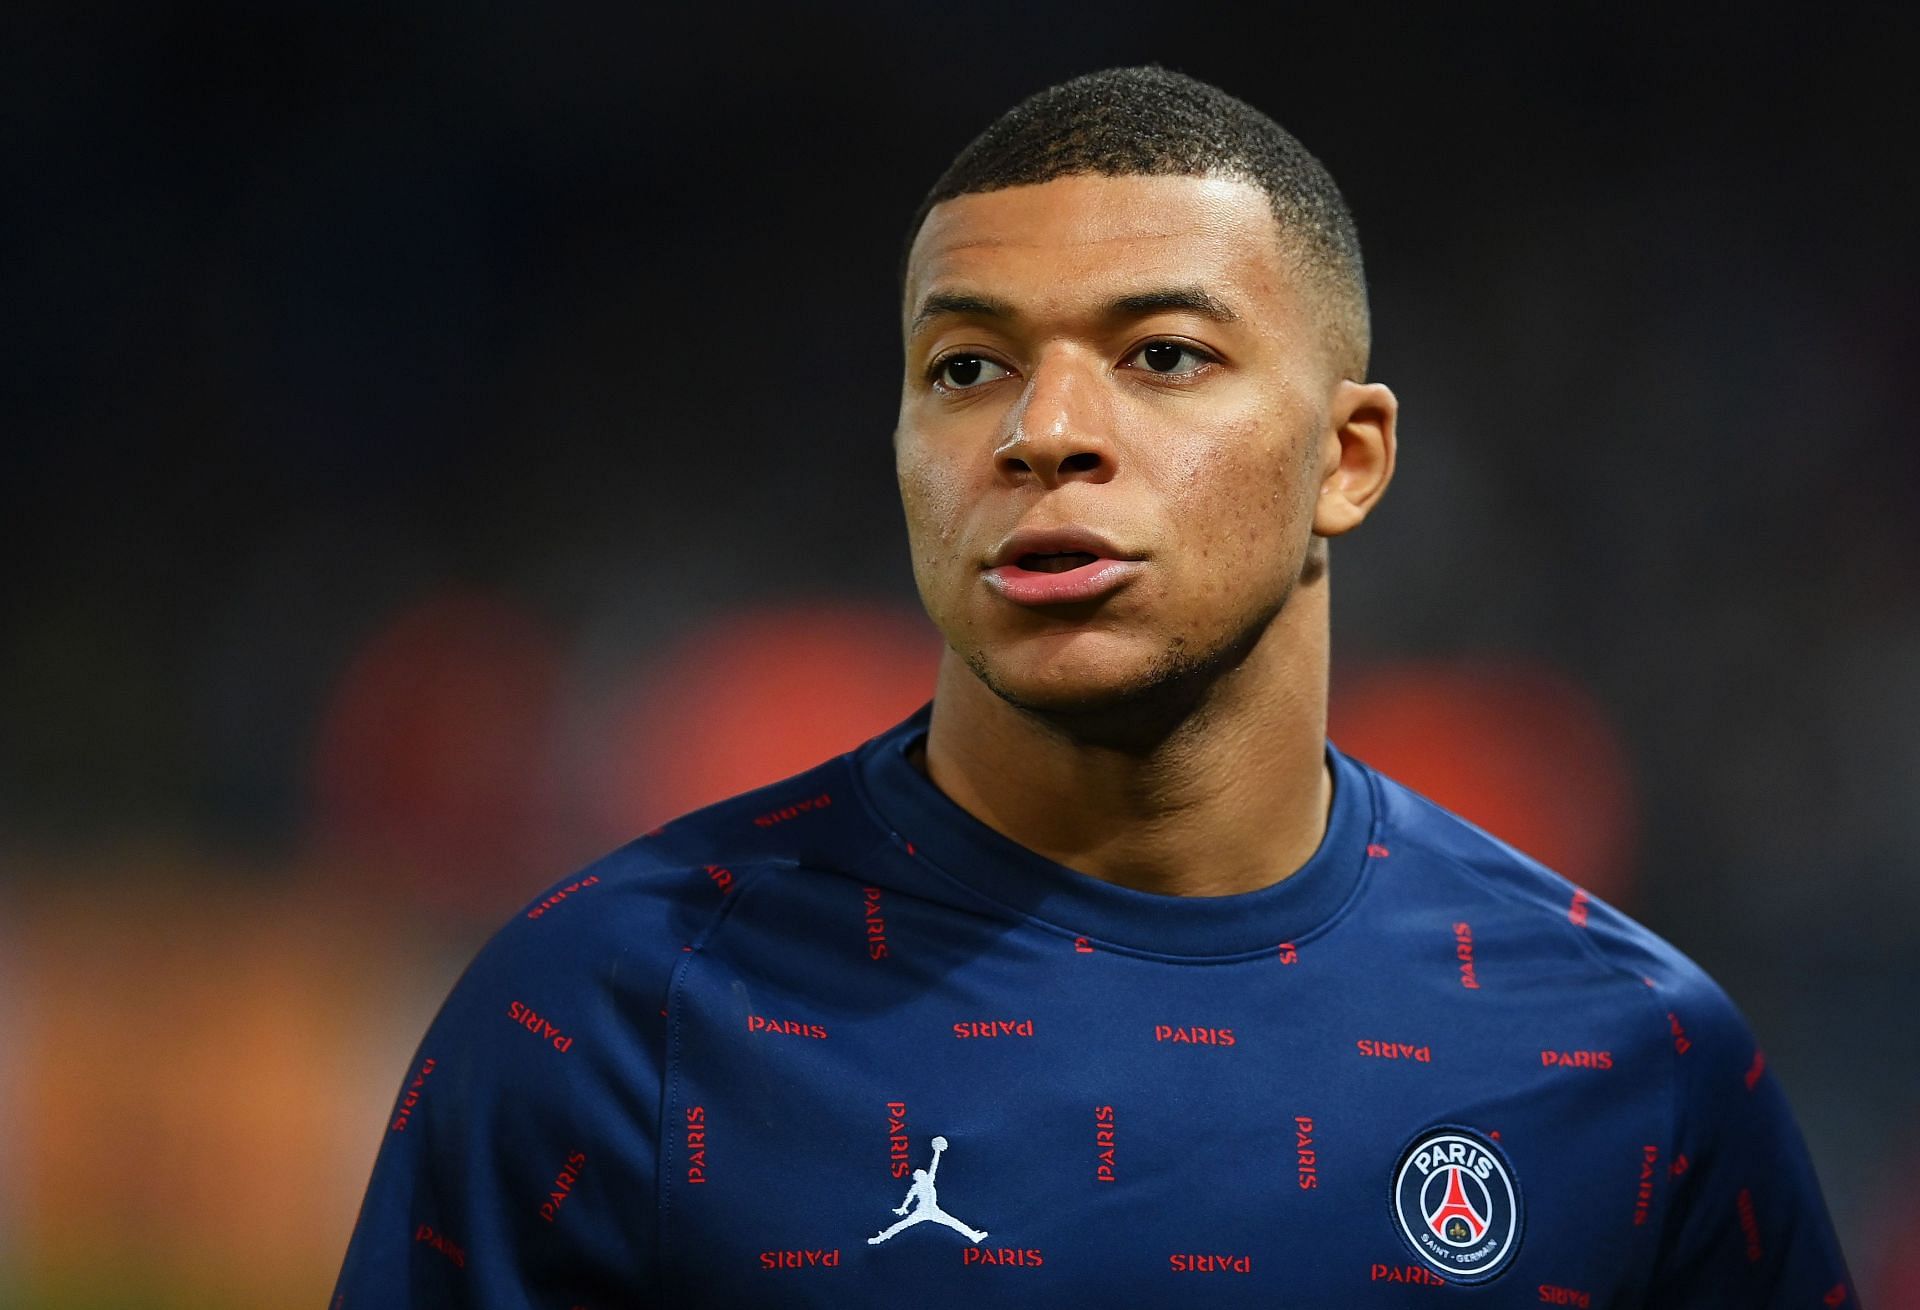 Kylian Mbappe has been linked with a move to Real Madrid for a while.